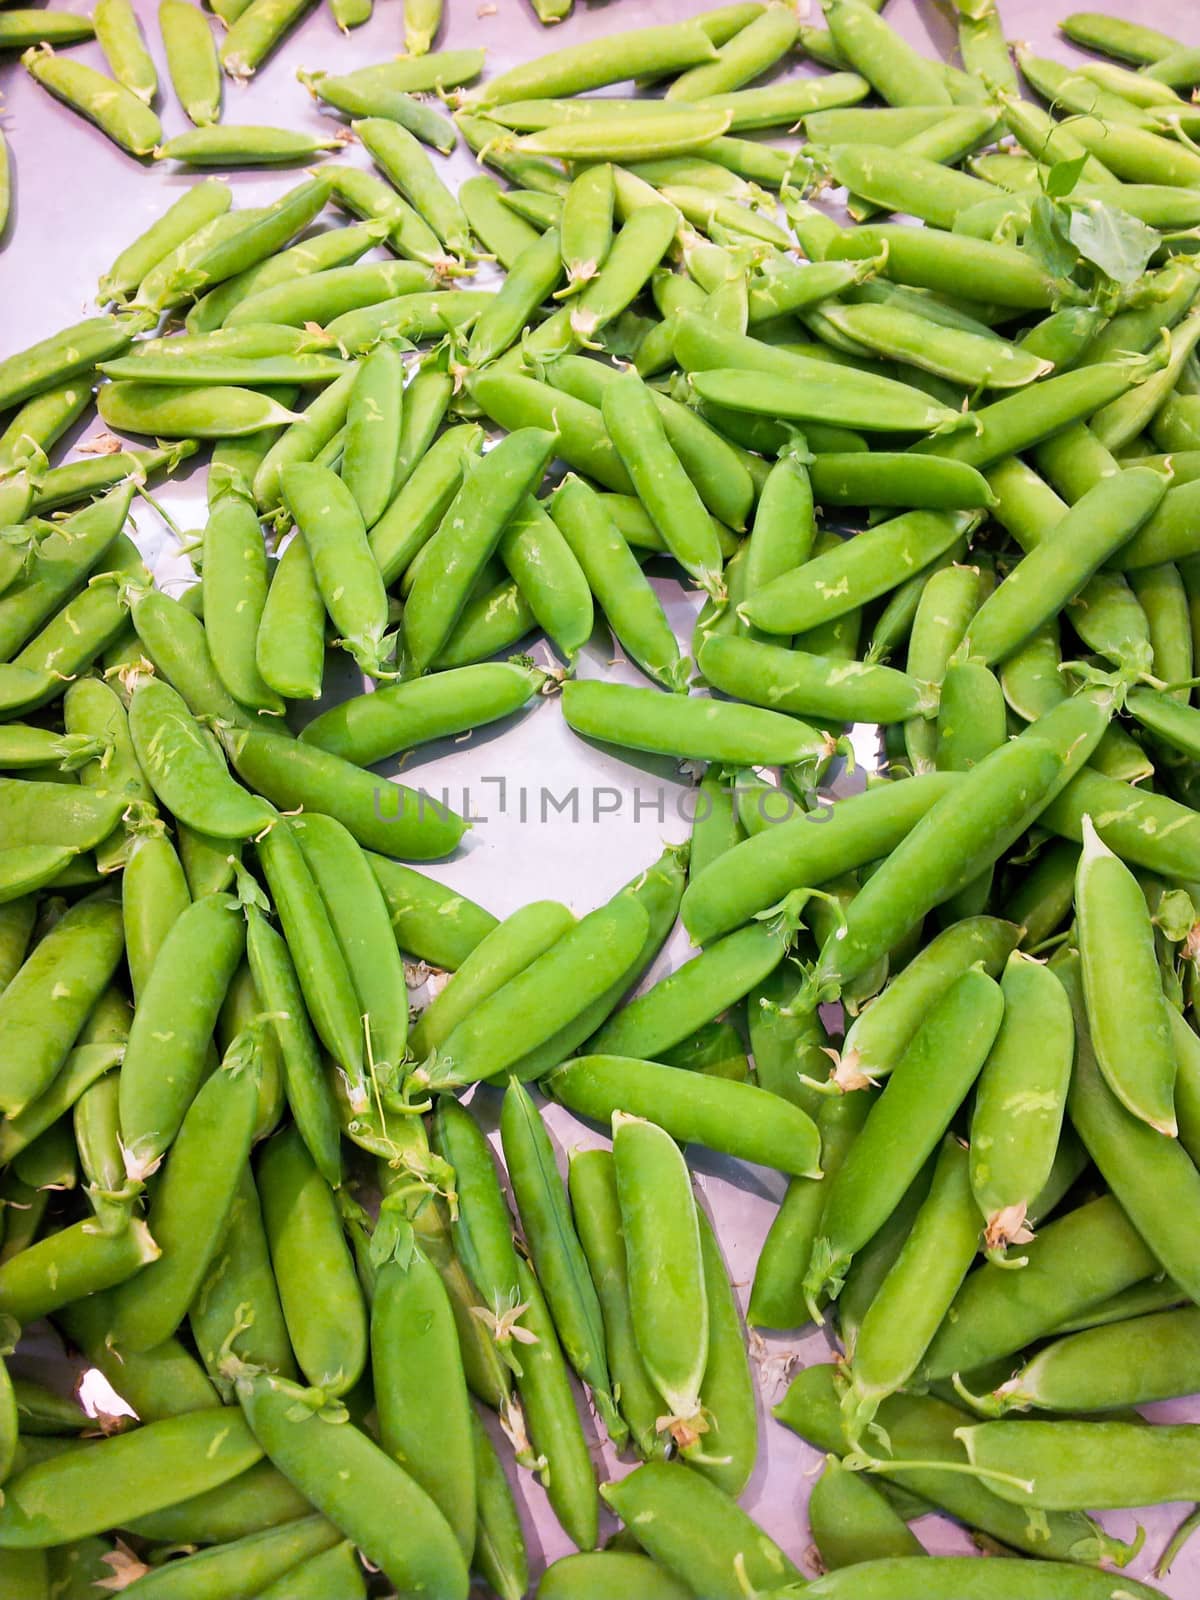 Pile of green beans in a tray with white paper, at a marketplace